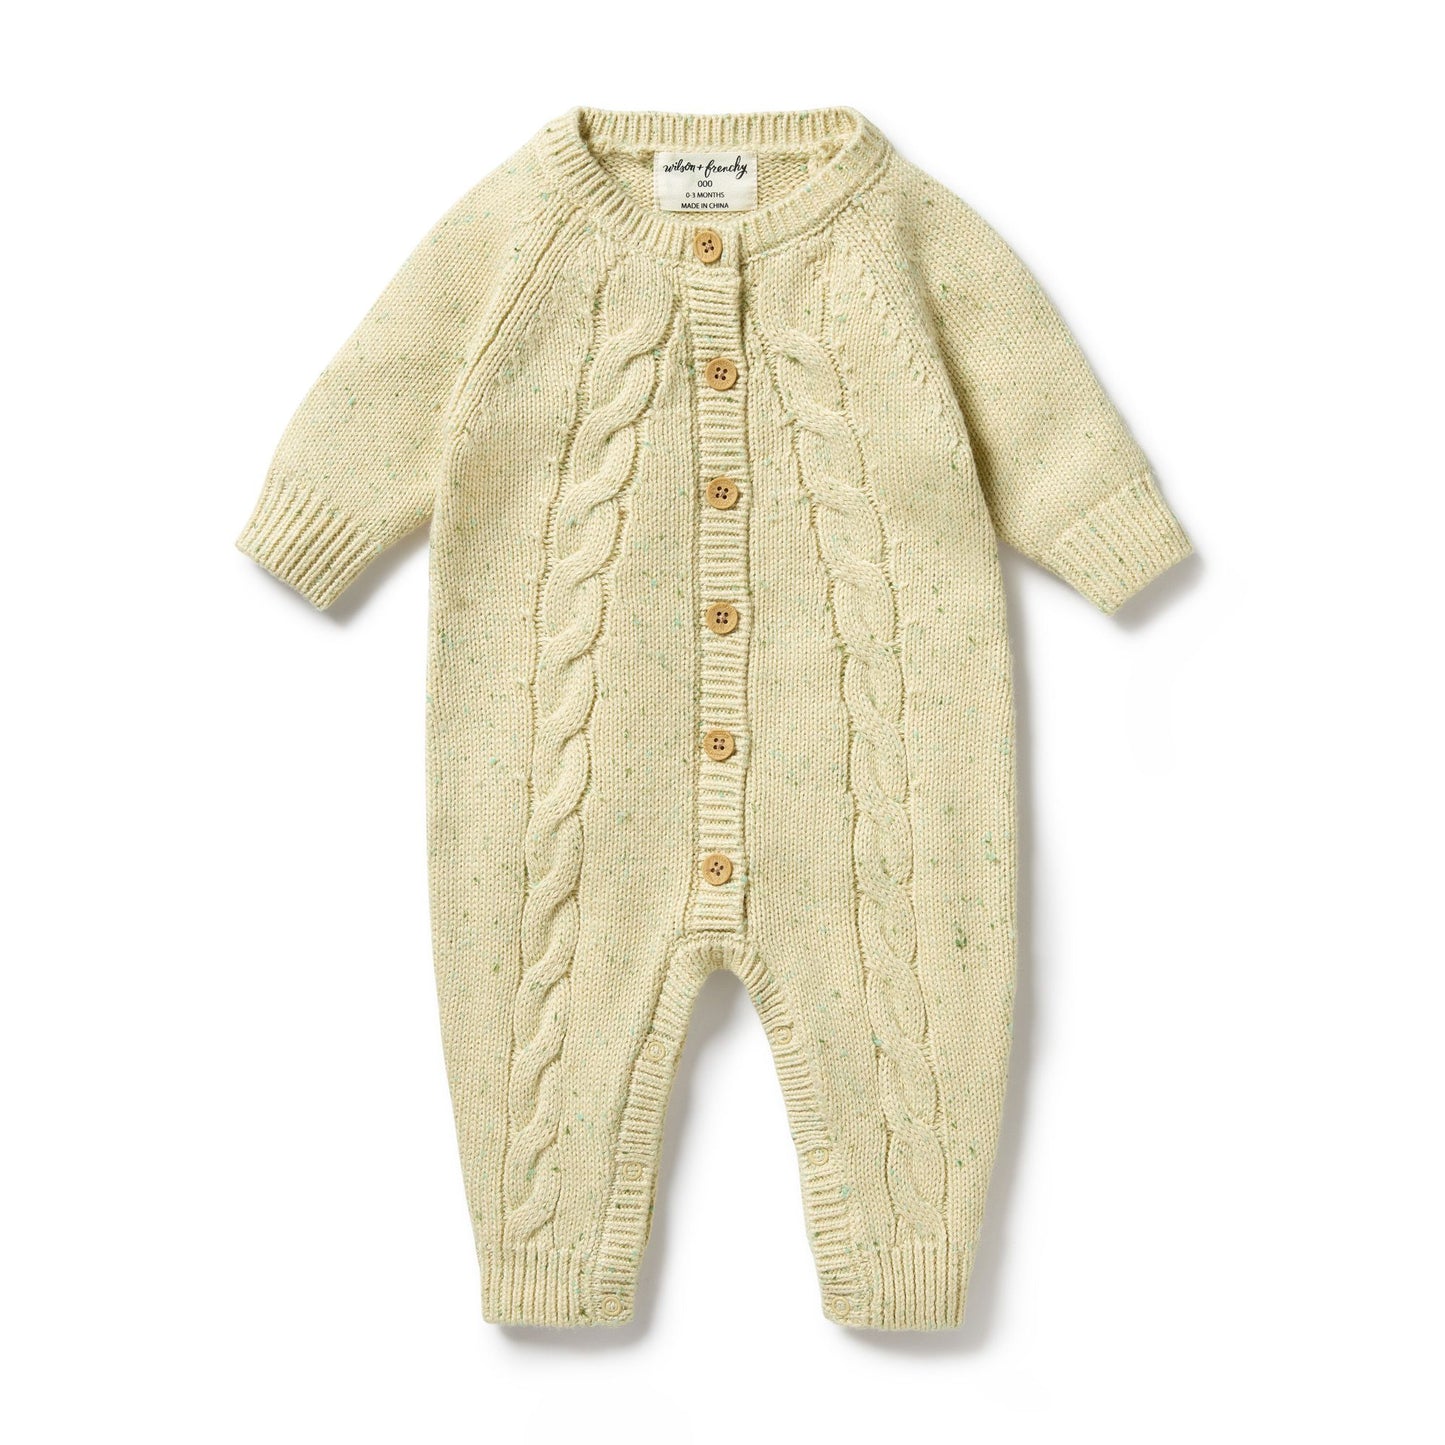 "Wilson & Frenchy" - Knitted Cable Growsuit - Cactus Fleck